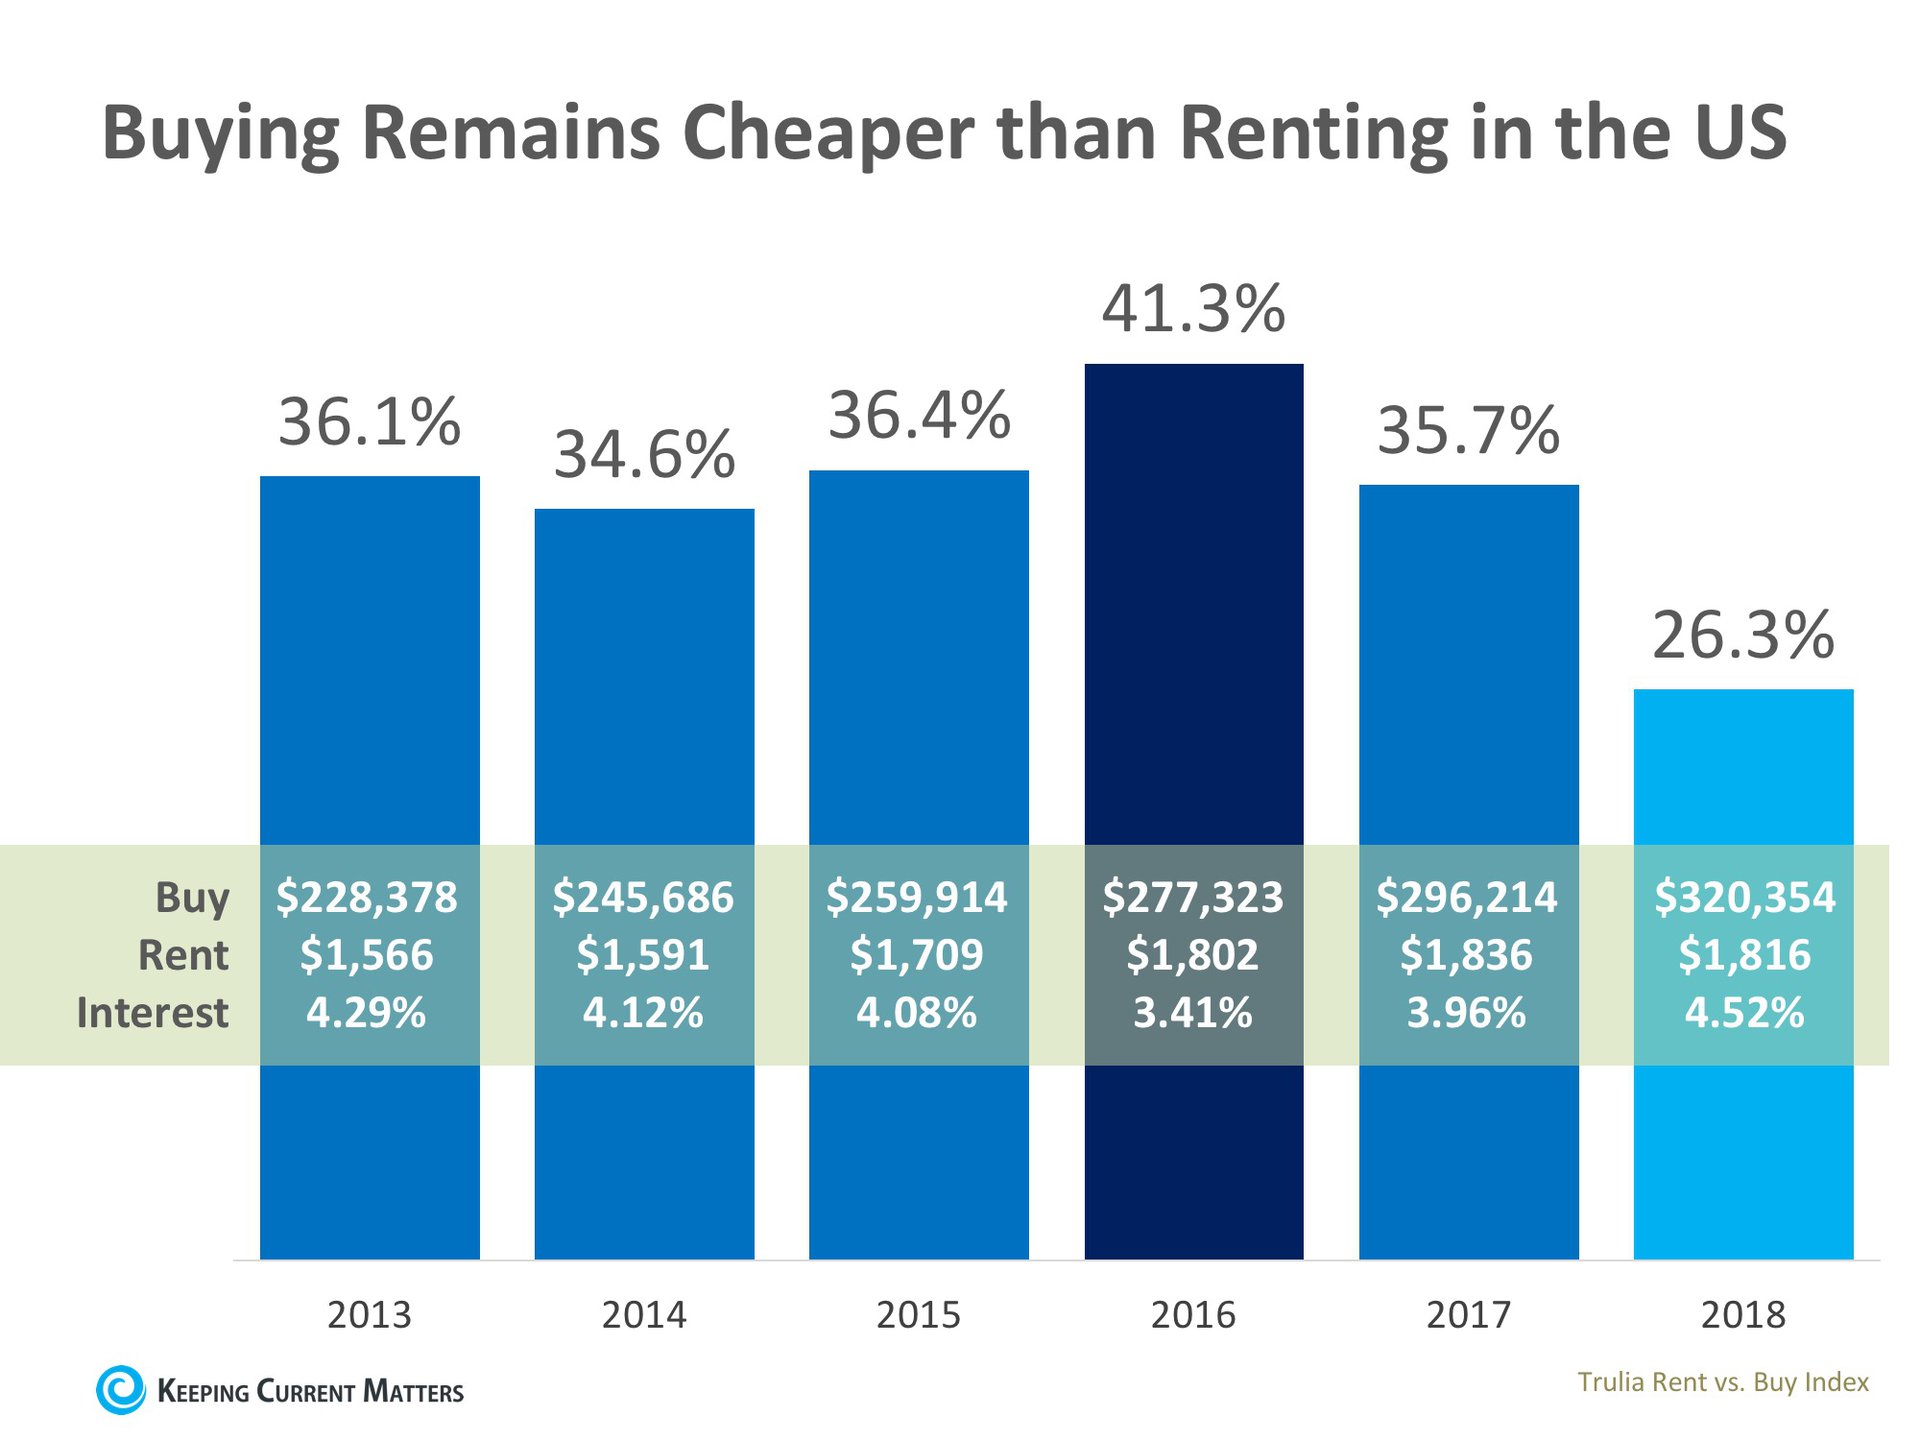 Buying Is Now 26.3% Cheaper Than Renting in the US | Keeping Current Matters